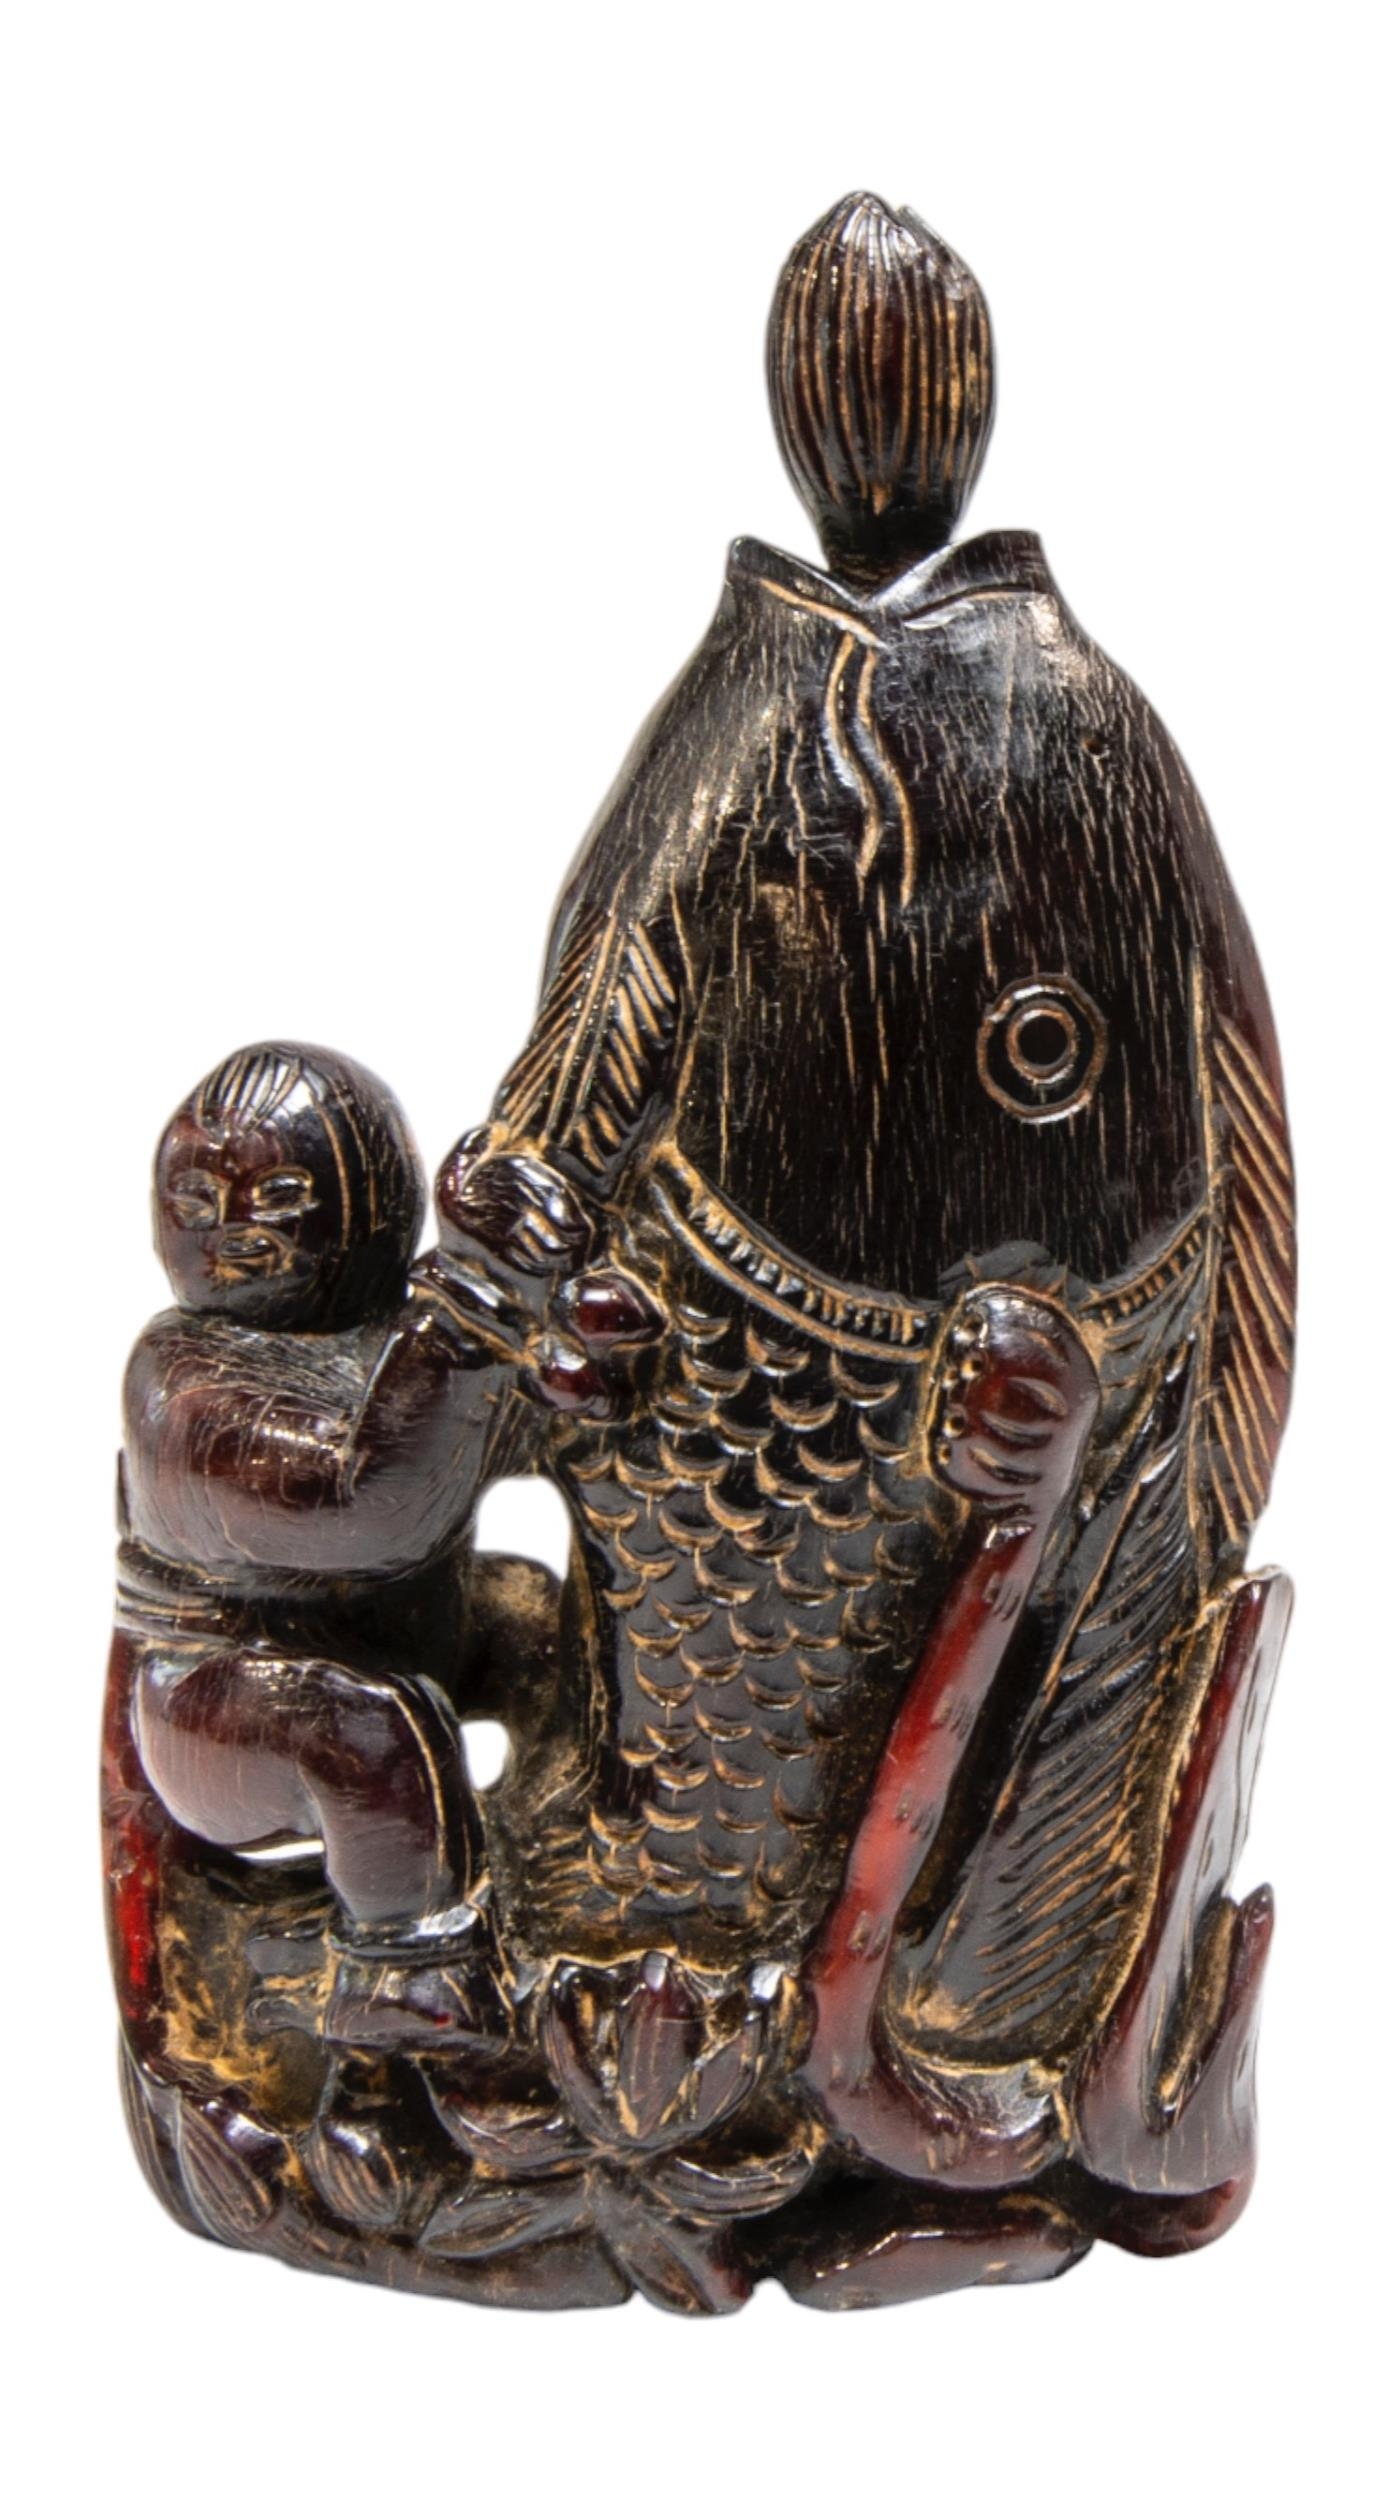 A JAPANESE CARVED HARDWOOD OKIMONO / FLASK, modelled as a fisherman astride a large fish, his